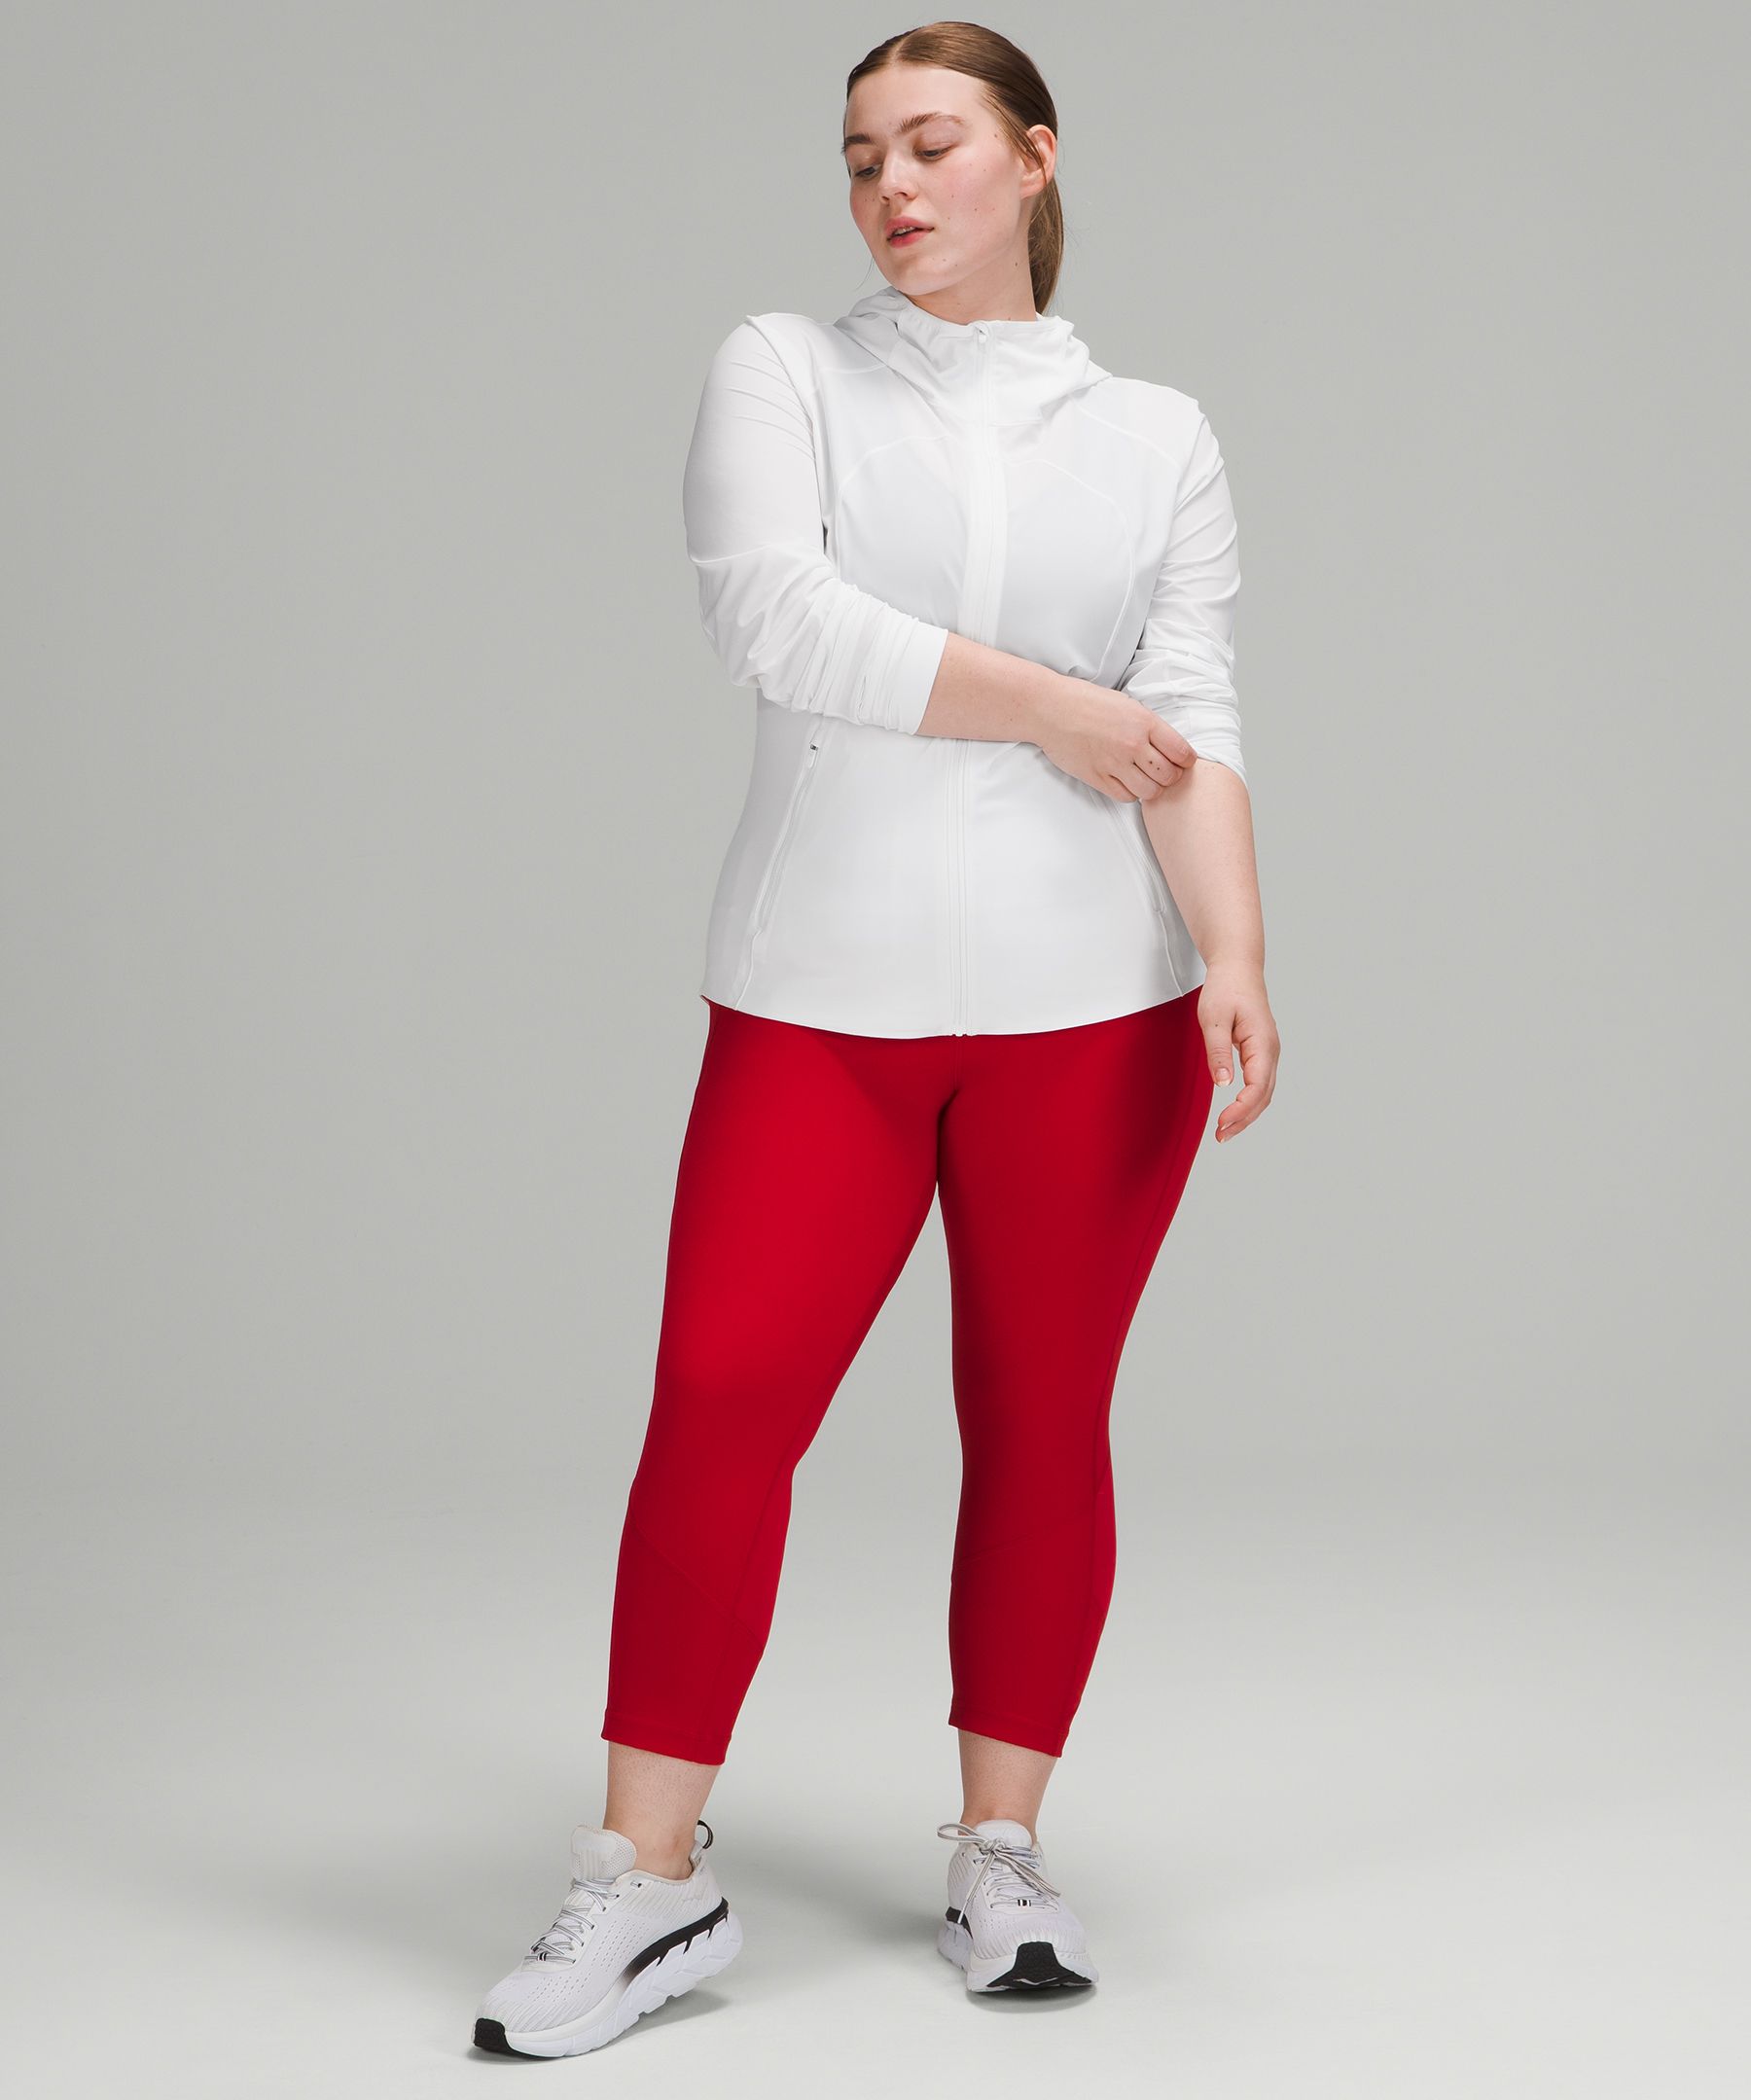 Plus Size Red Running Crops & Capris.